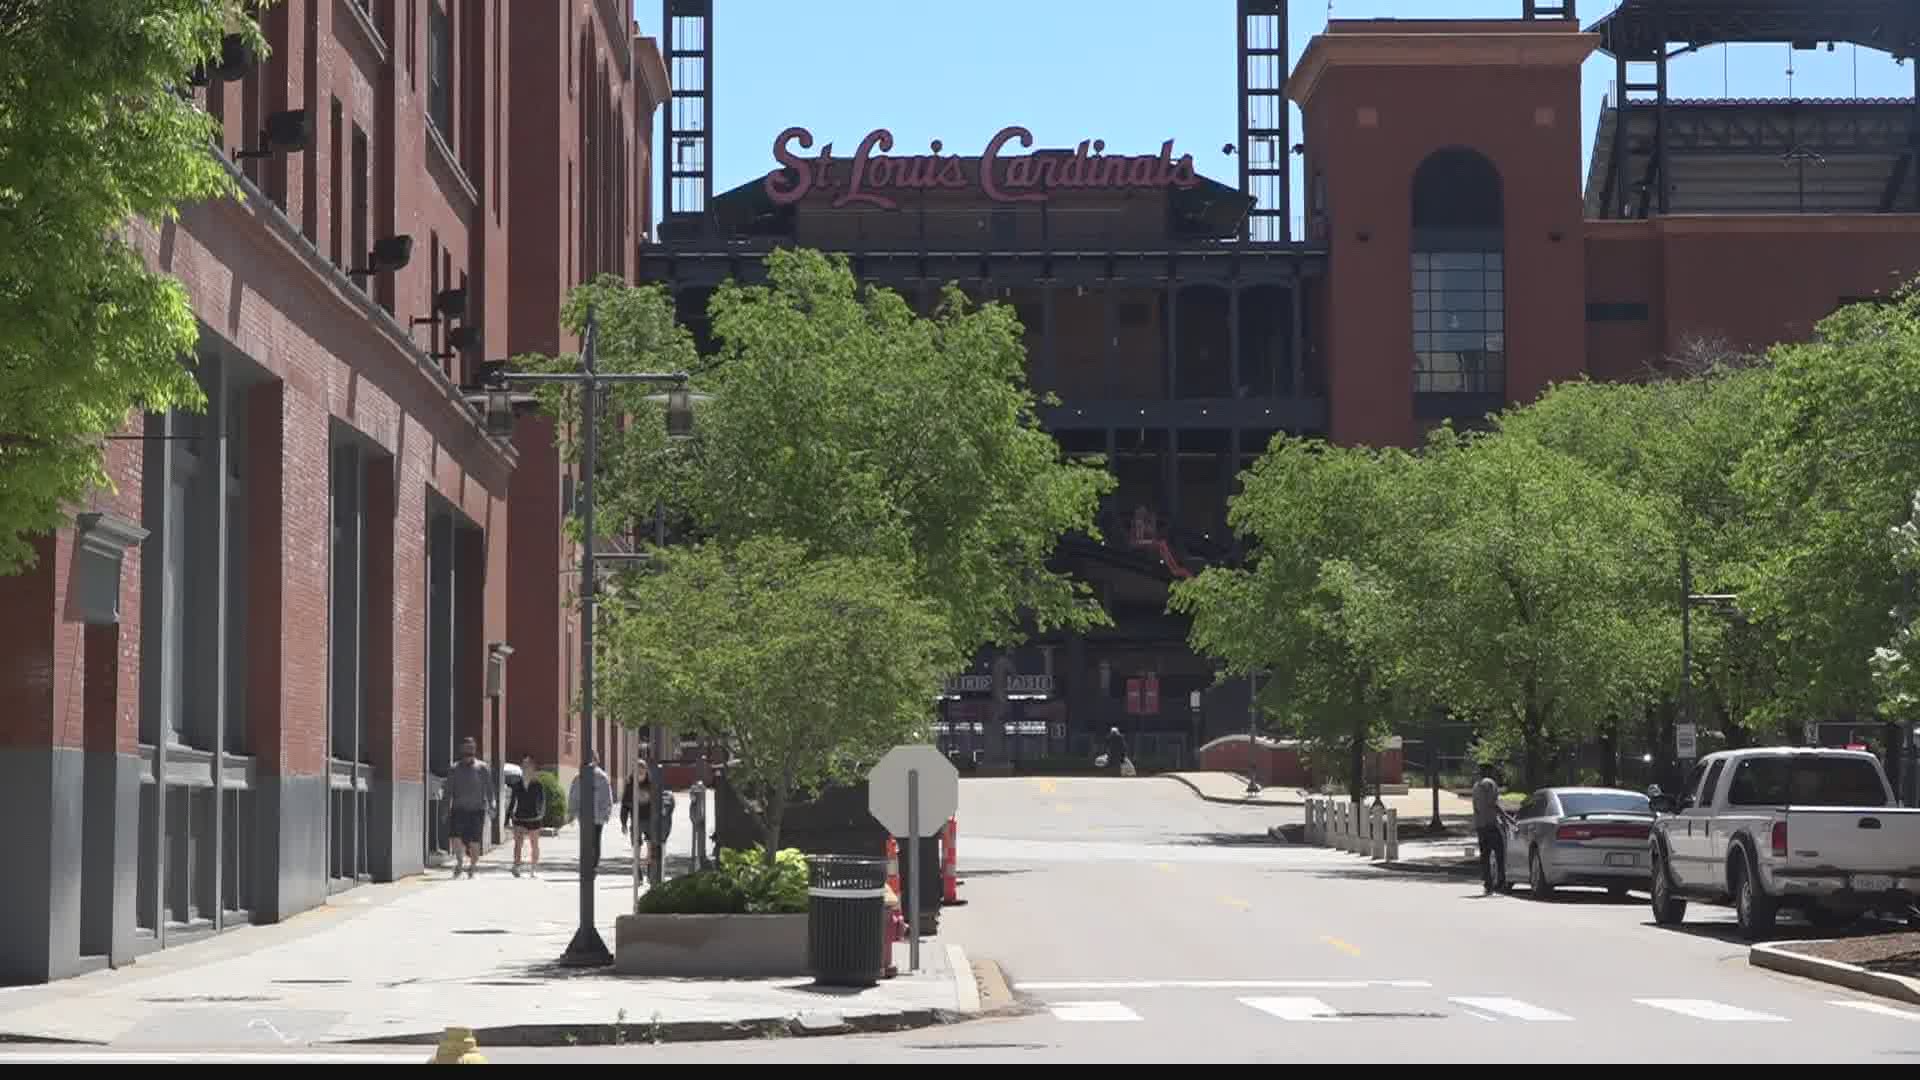 With no Cardinals Blues games going on downtown, businesses are struggling.